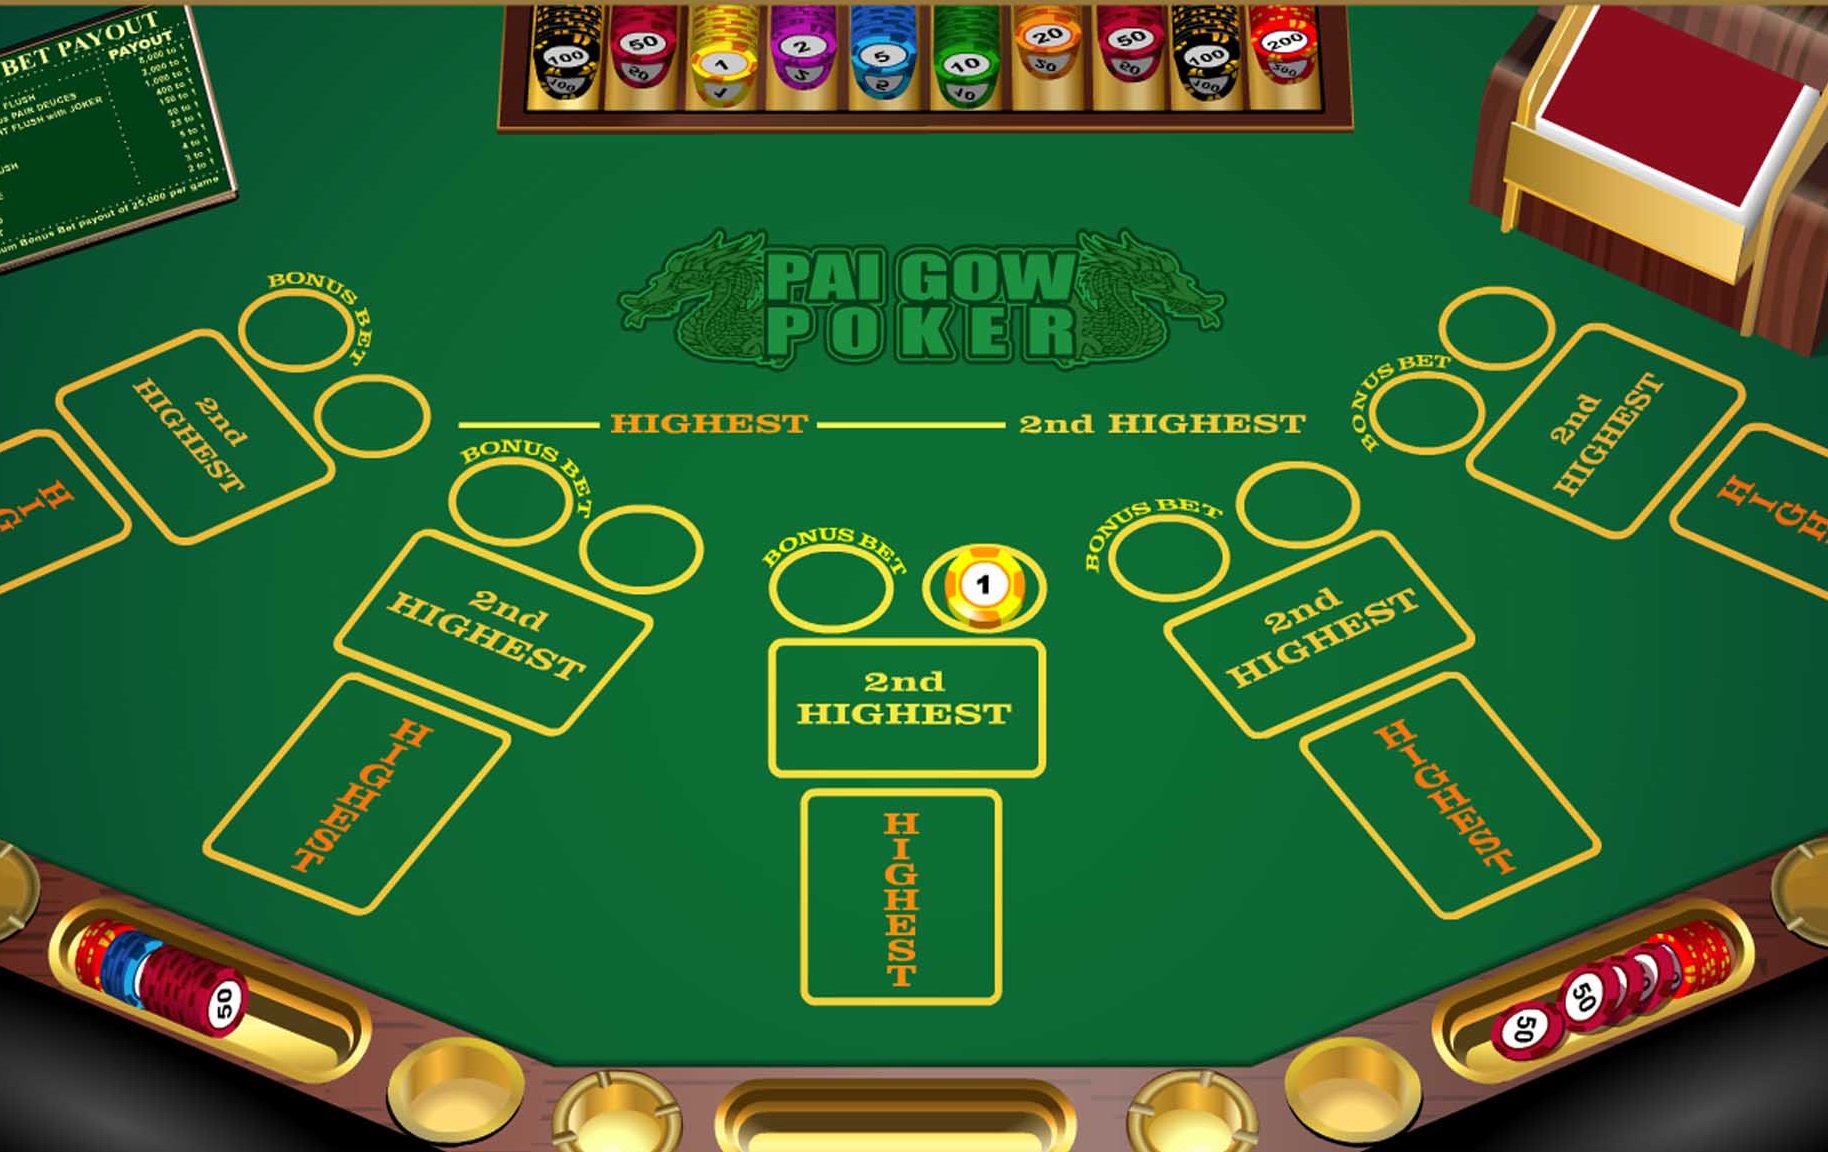 The system of playing pai gow poker